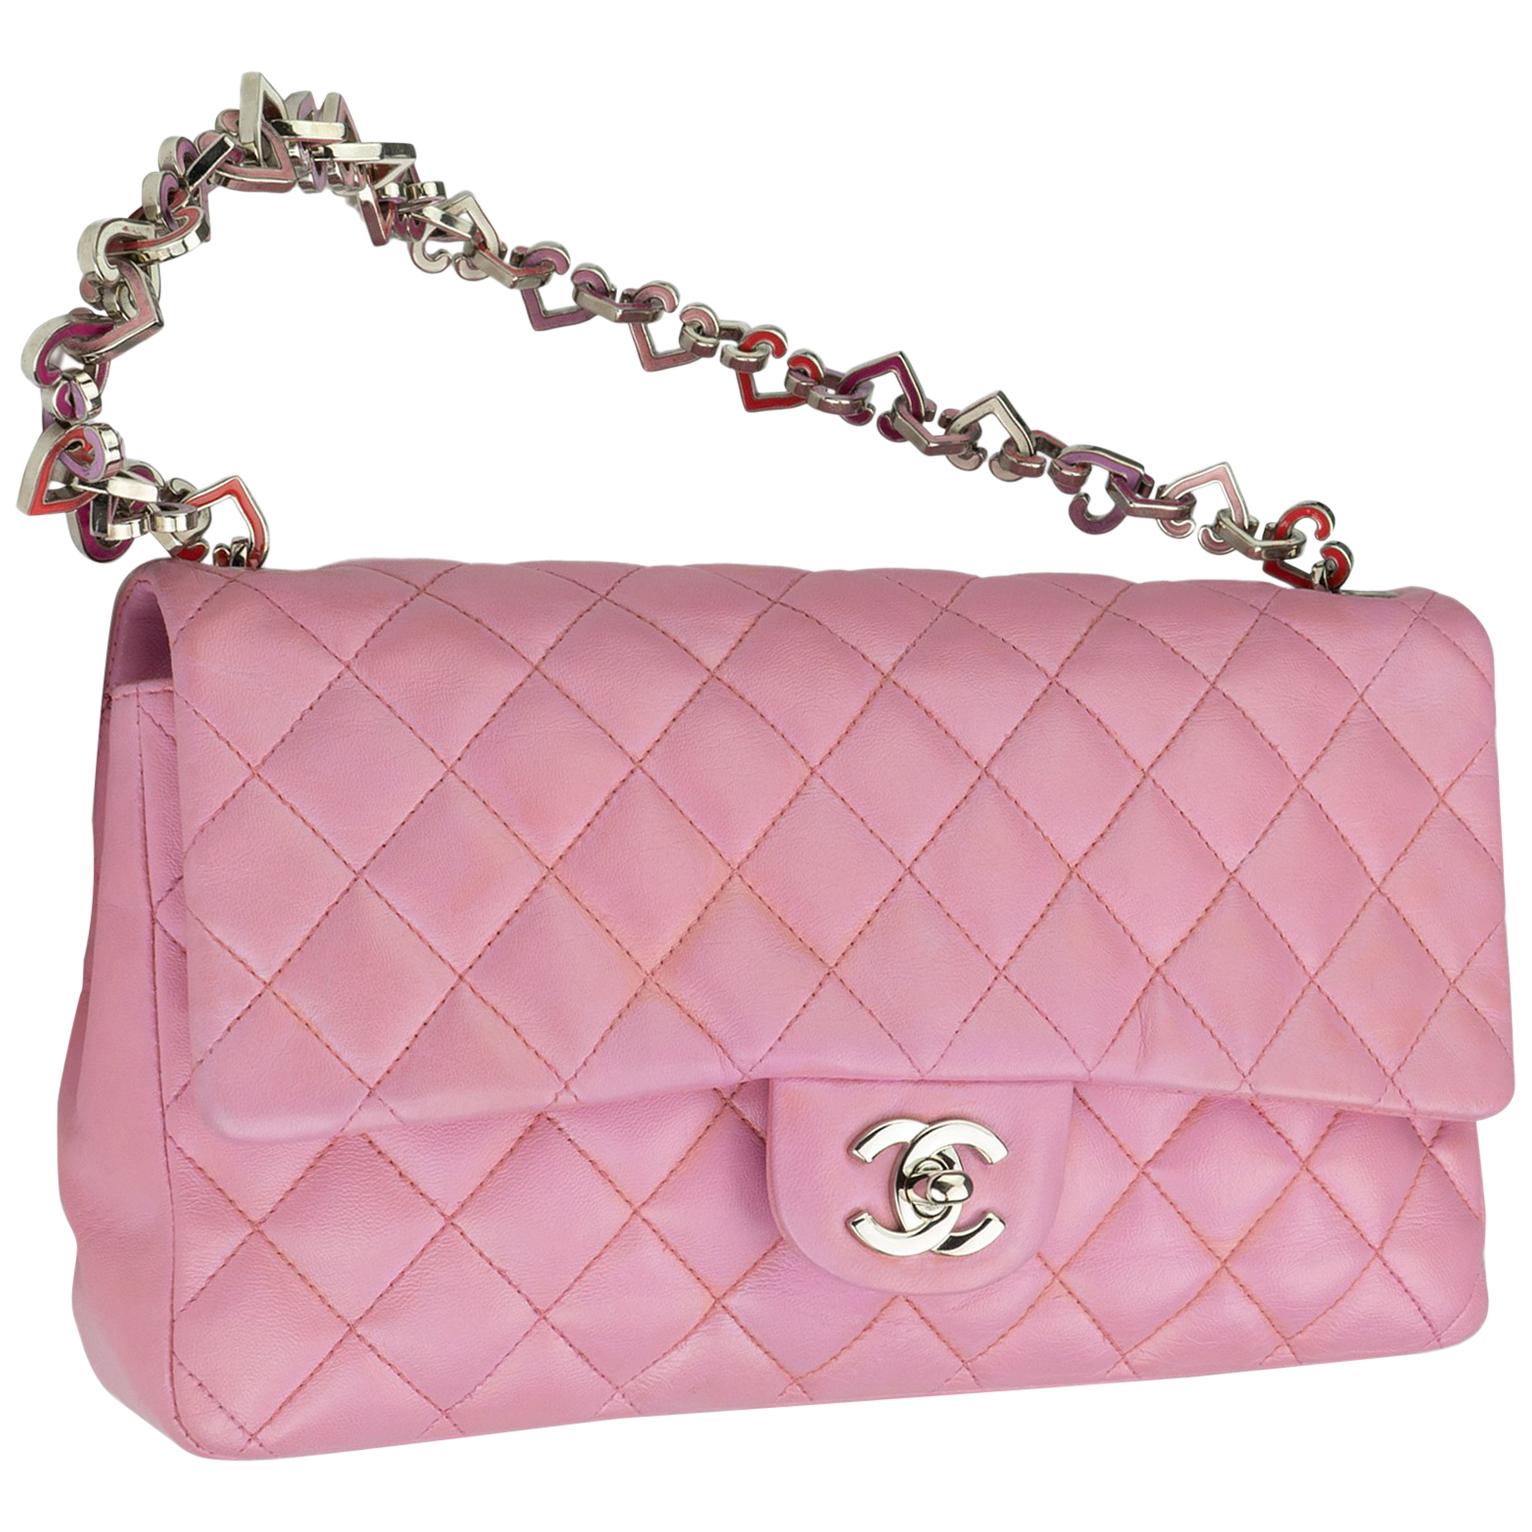 Chanel Limited Edition Pink Valentine Heart Charm Classic Flap
2004 {VINTAGE 14 Years} 
Pink quilted lambskin
Heart charm strap
Silver CC turnlock 
Classic back pocket
Pink logo microfiber interior
Interior zippered pocket 
Handle drop: 7.5